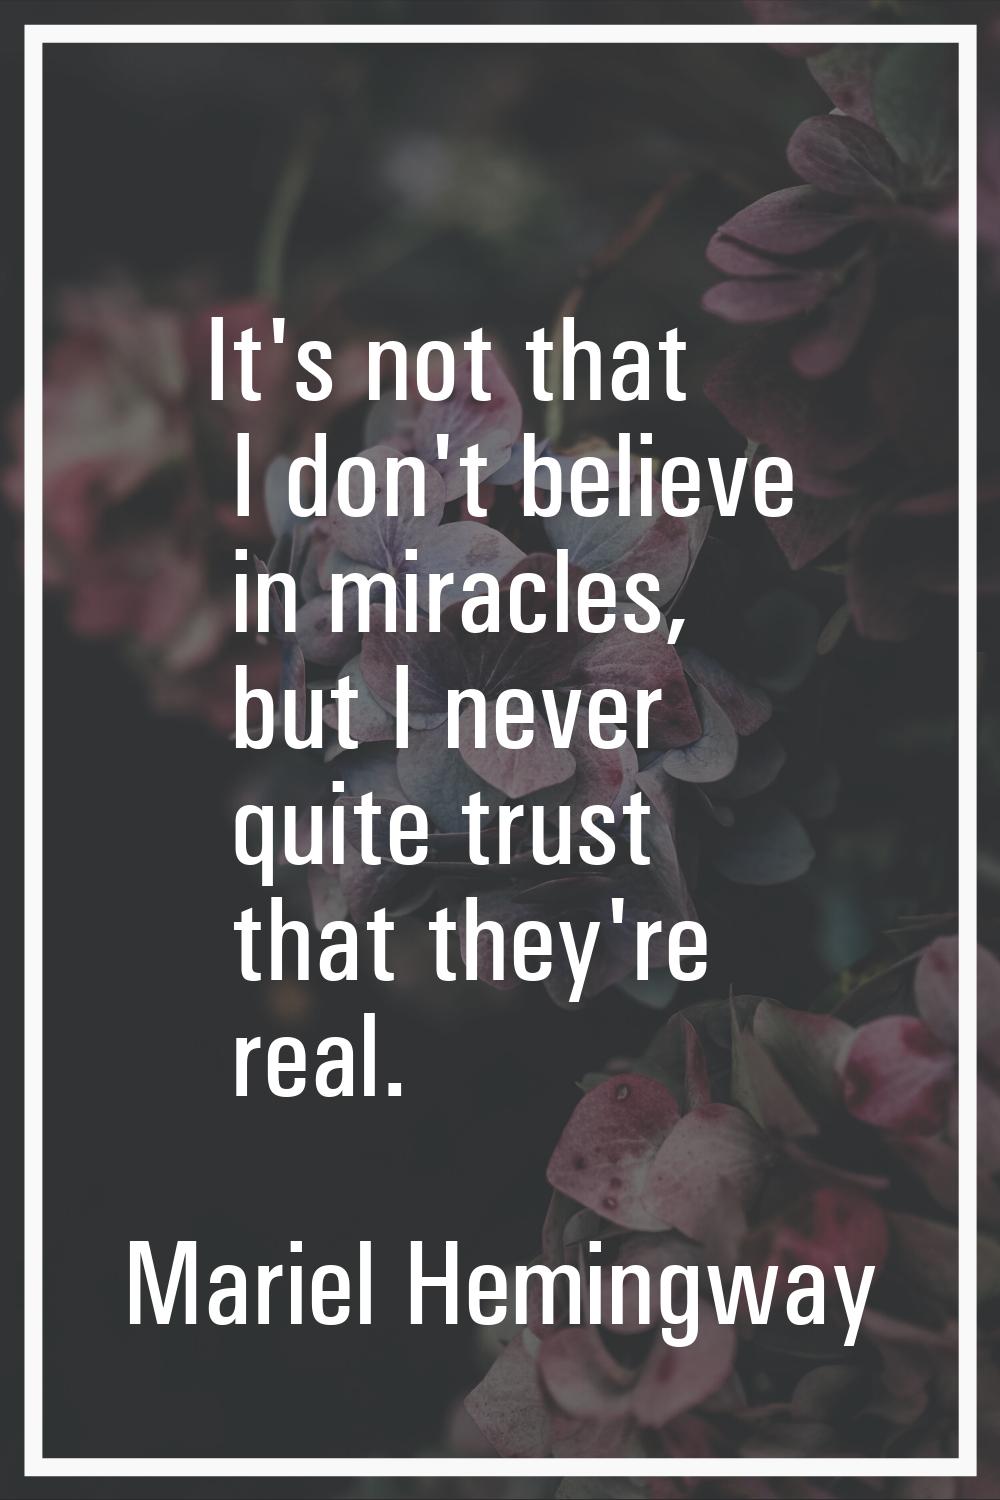 It's not that I don't believe in miracles, but I never quite trust that they're real.